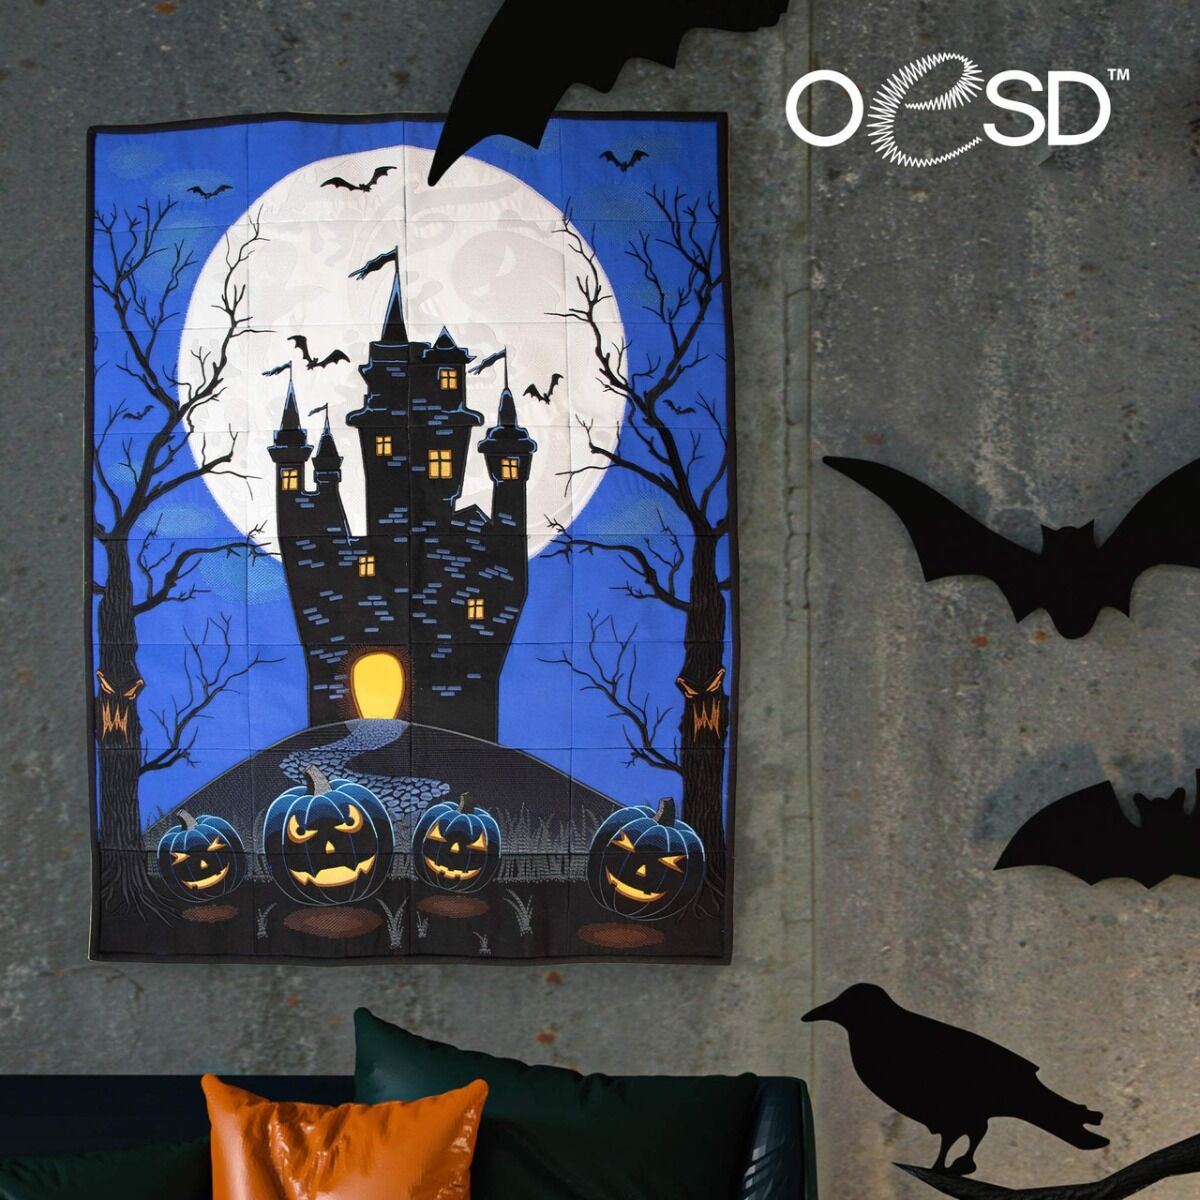 OESD Haunted Hill Mansion Tiling Scene,OESD Haunted Hill Mansion Tiling Scene,OESD Haunted Hill Mansion Tiling Scene
